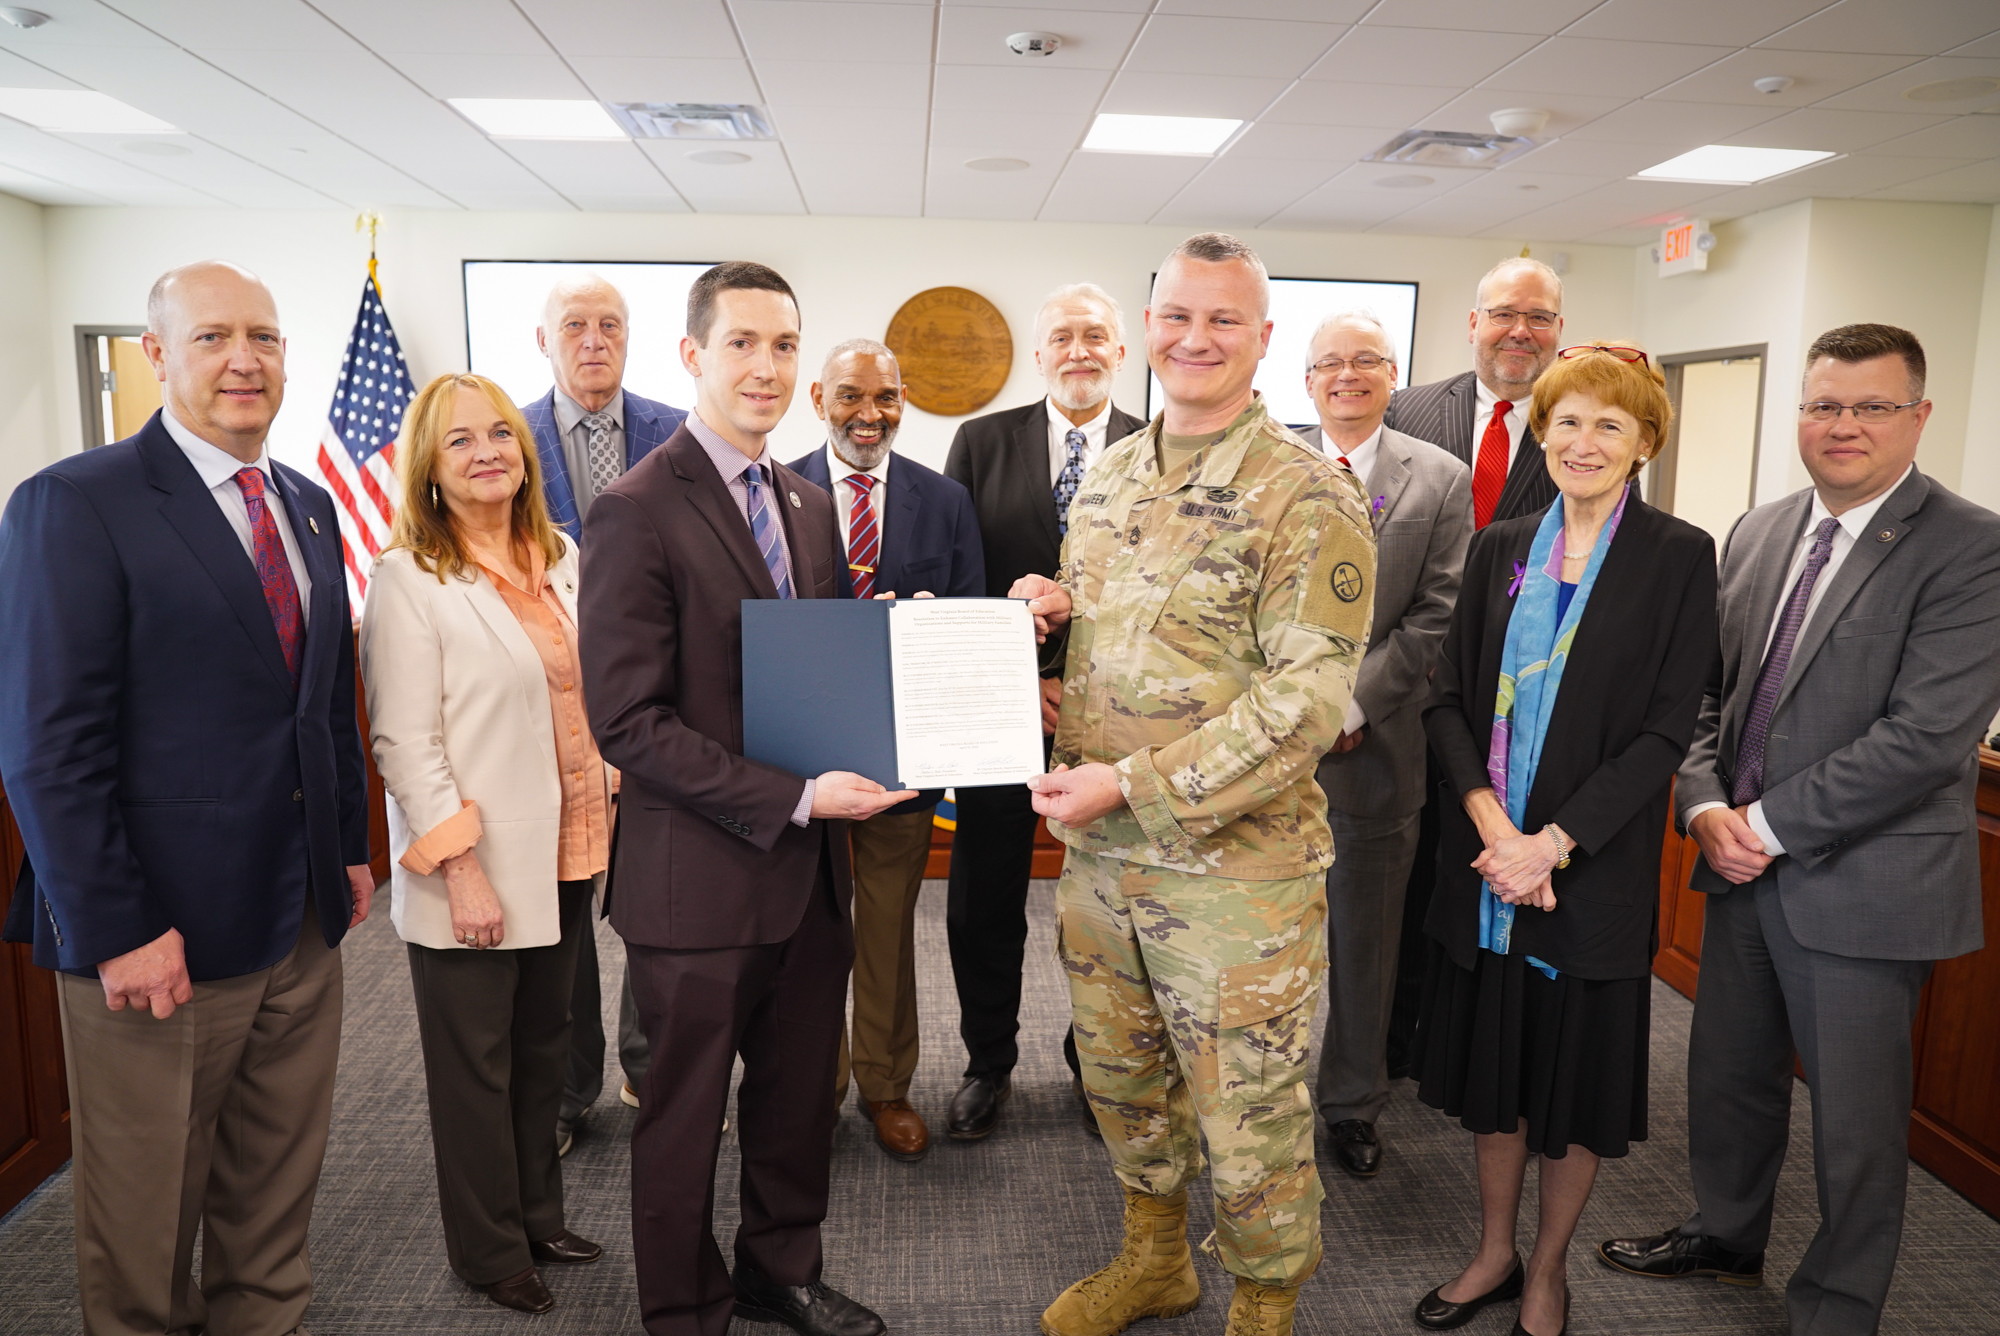 WV Board of Education Recognizes Month of the Military Child